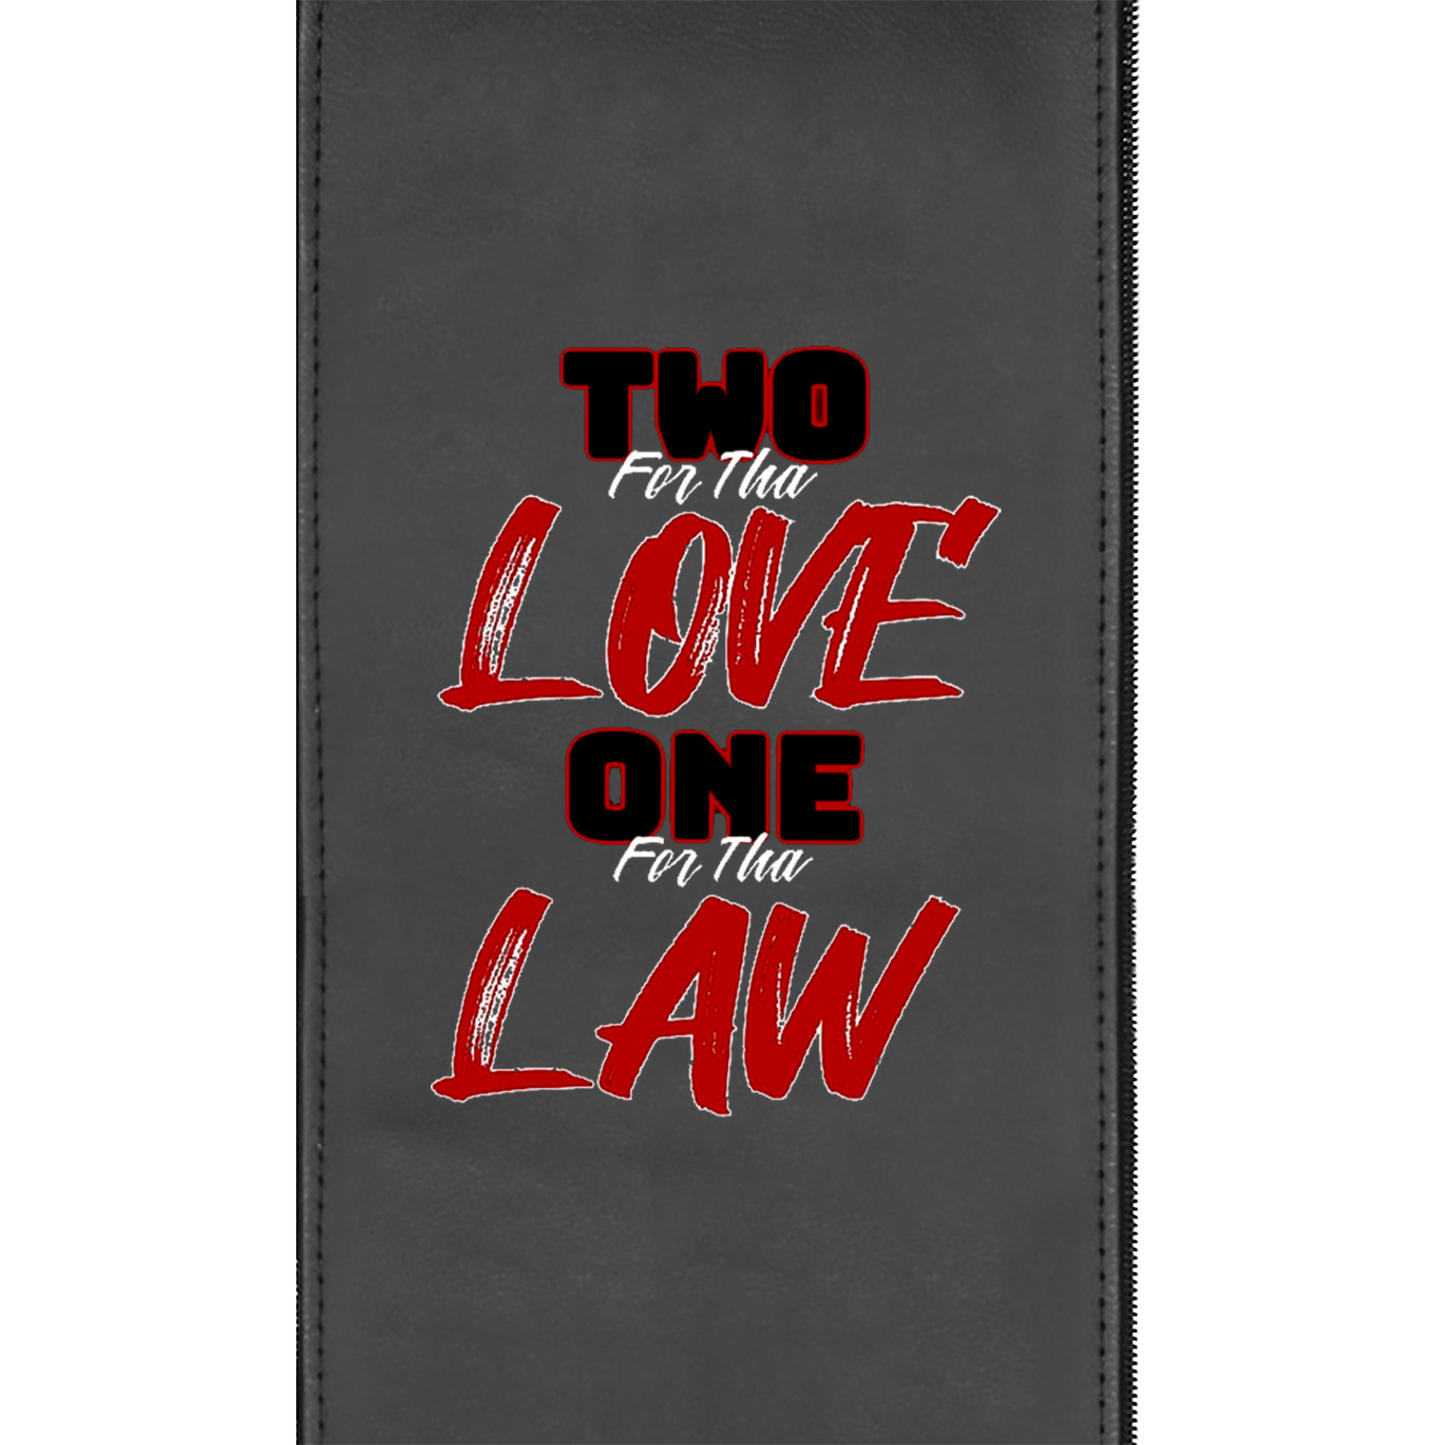 Stationary Club Chair with Two For Tha Love One For Tha Law  Logo